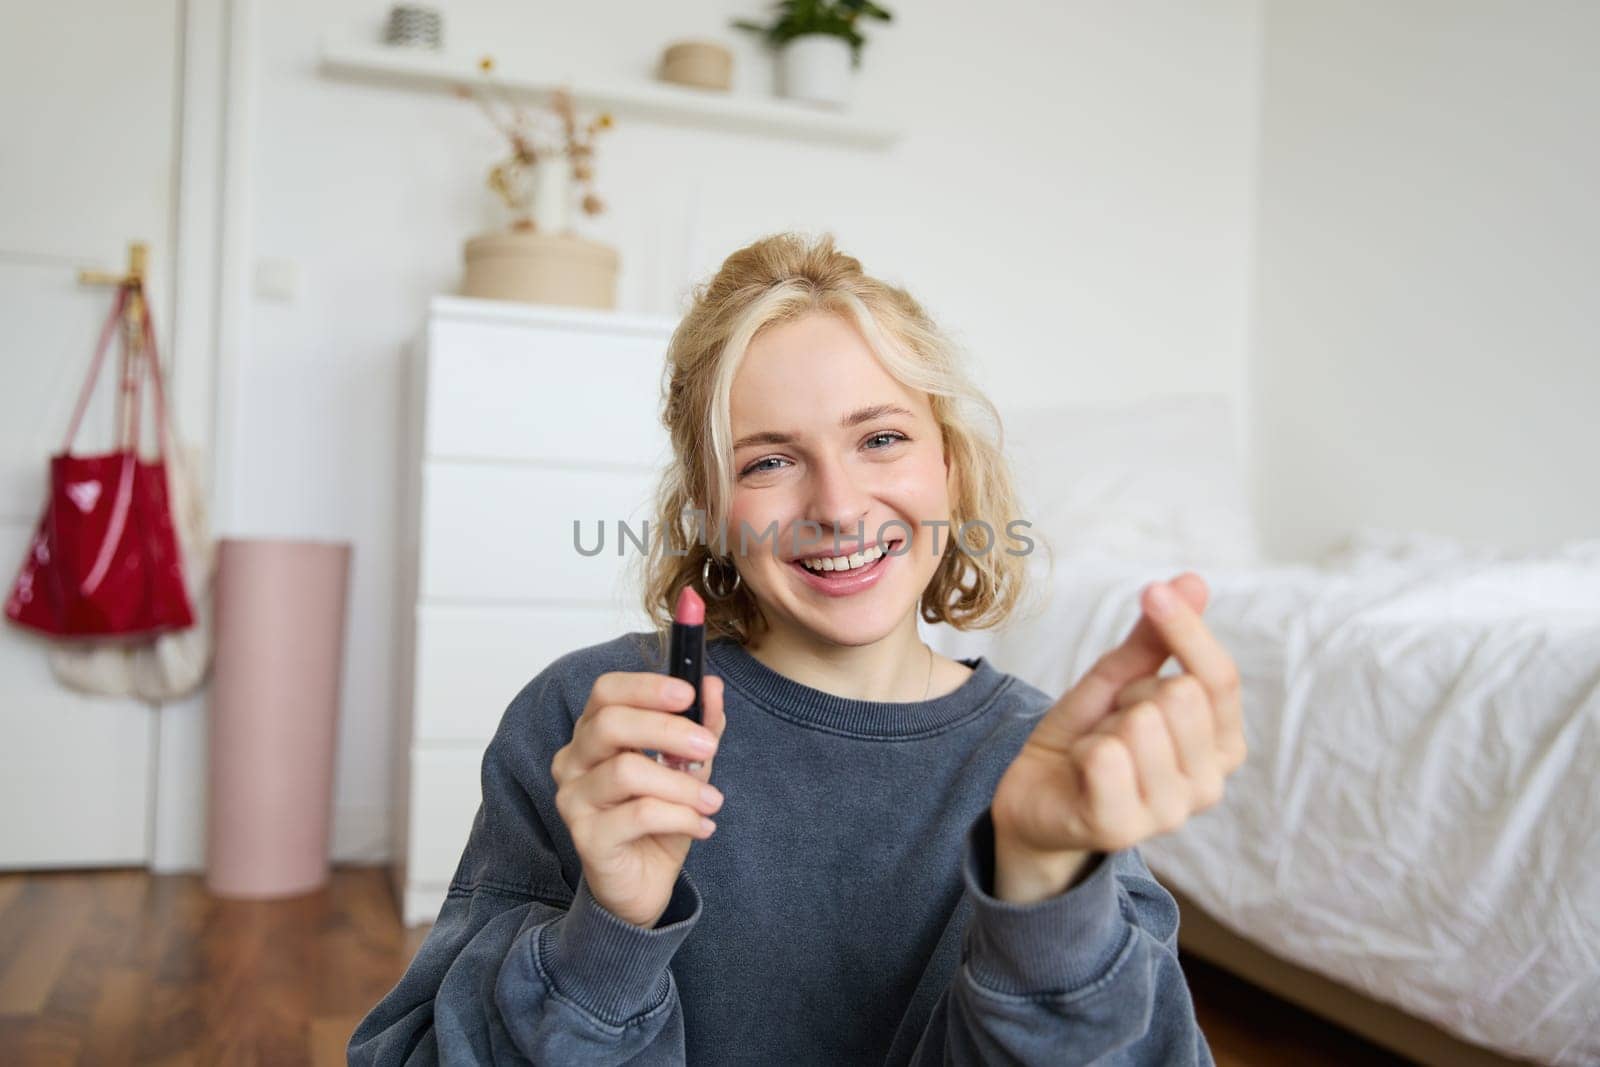 Portrait of young happy woman, content media creator recording a vlog about makeup in her room, using digital camera and stabiliser to show beauty products, holding lipstick.